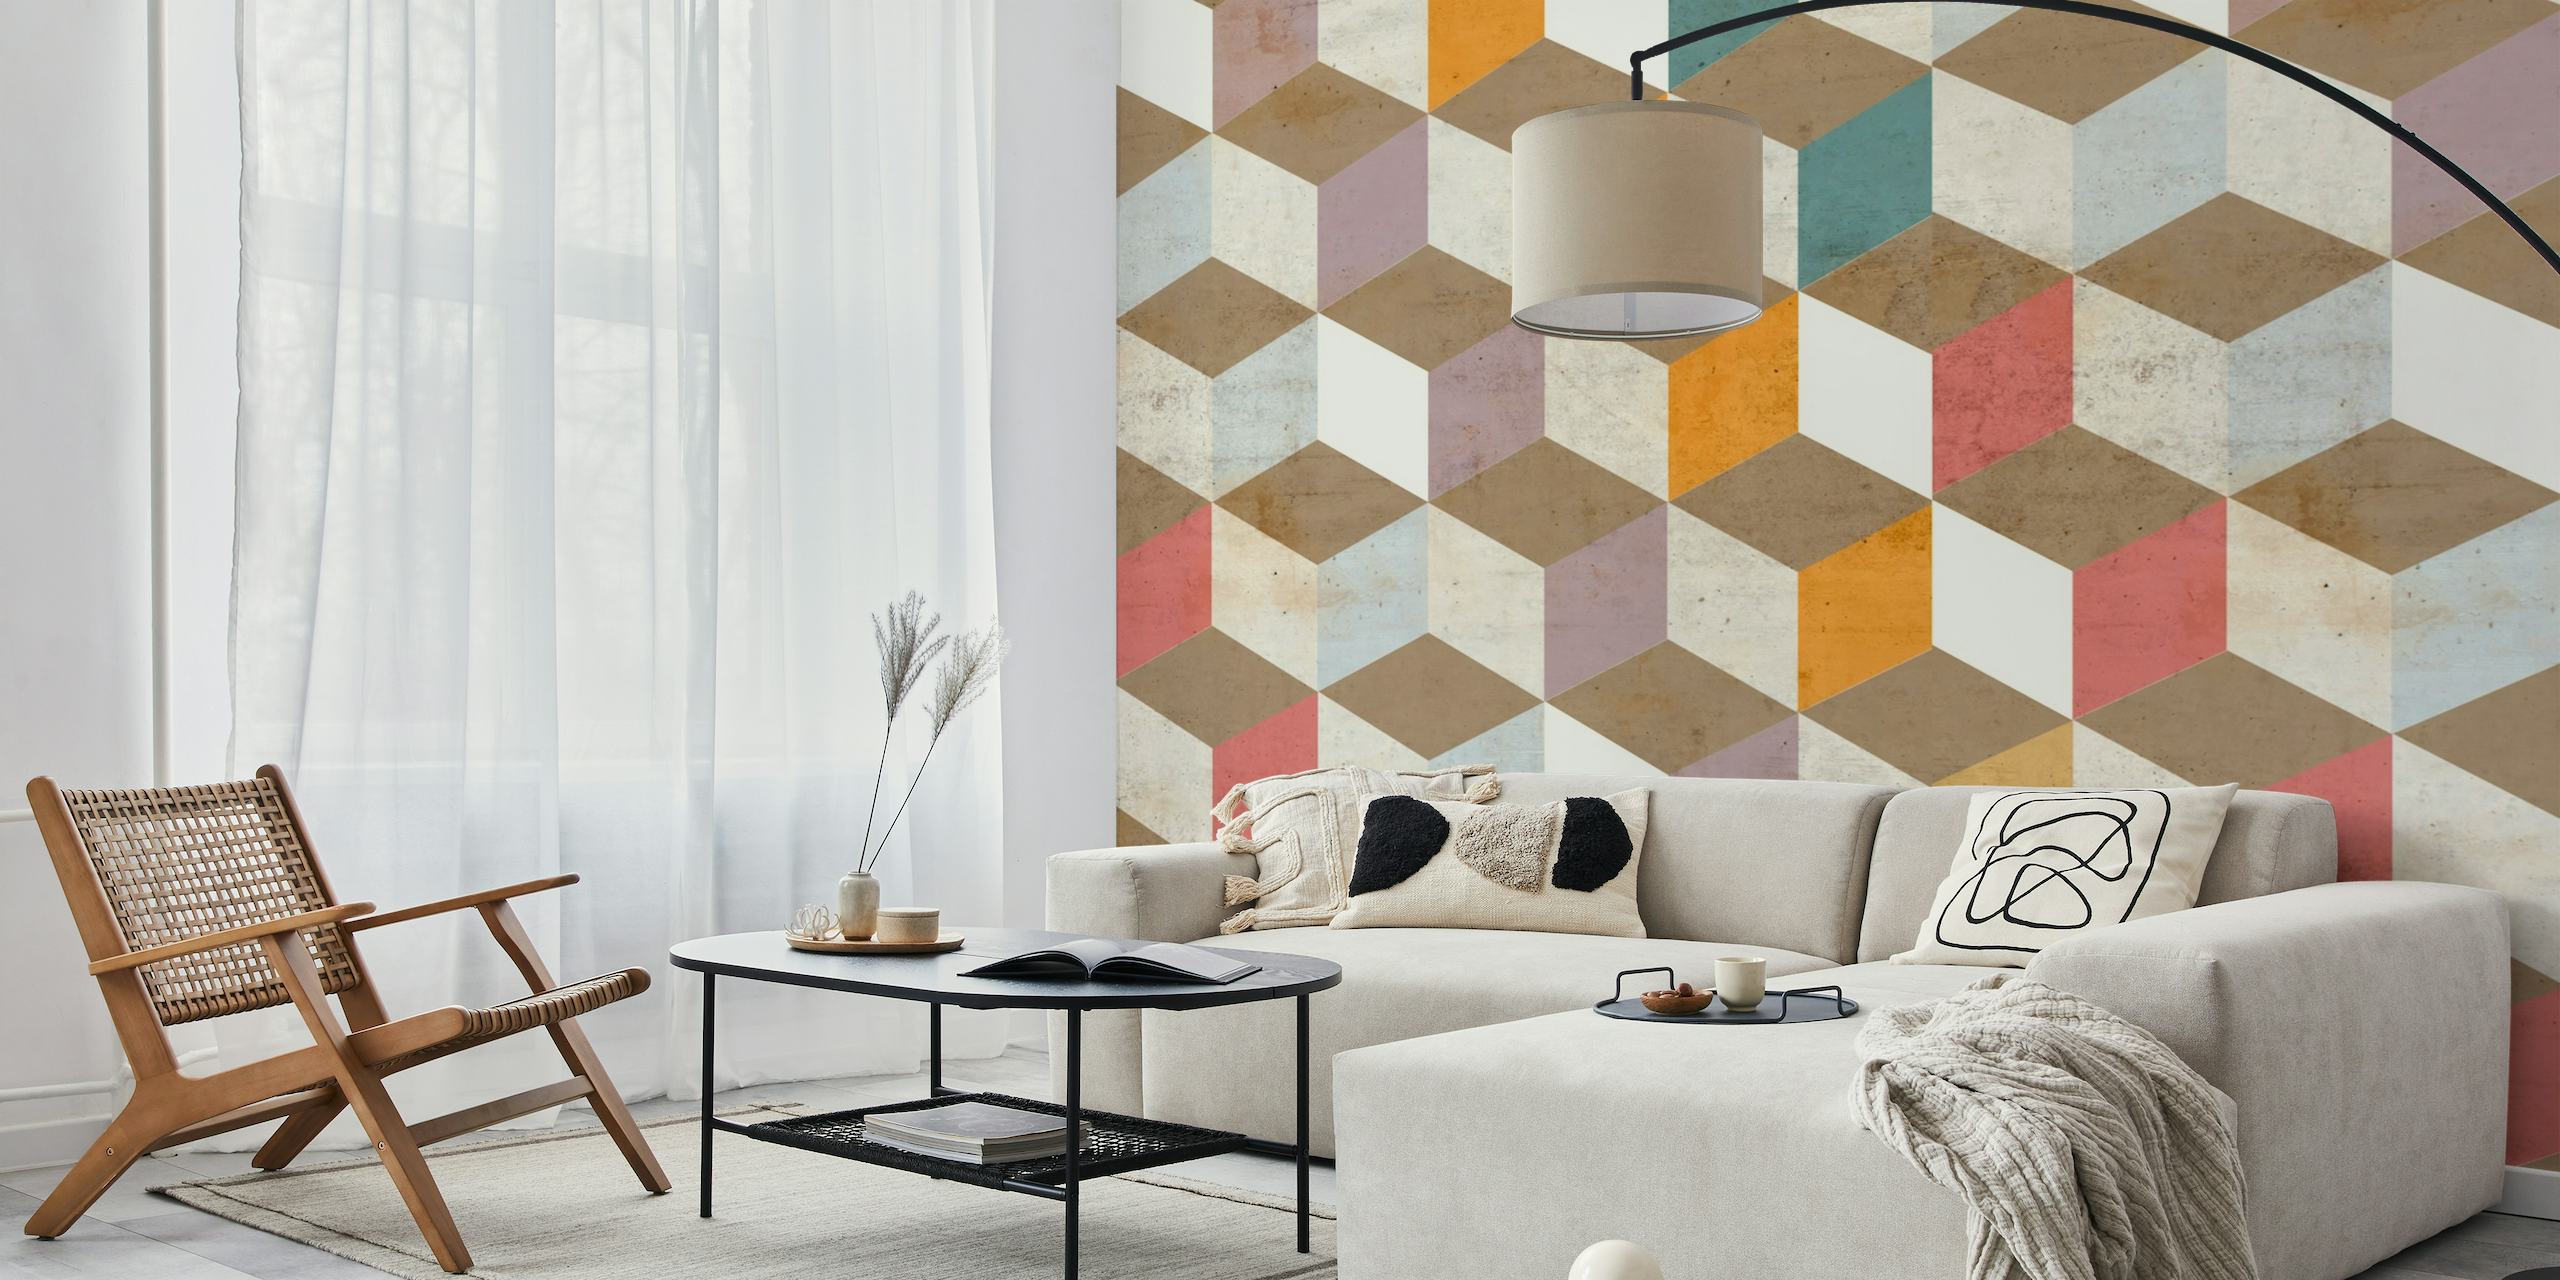 Geometric Theme wall mural with a blend of muted colors and patterns